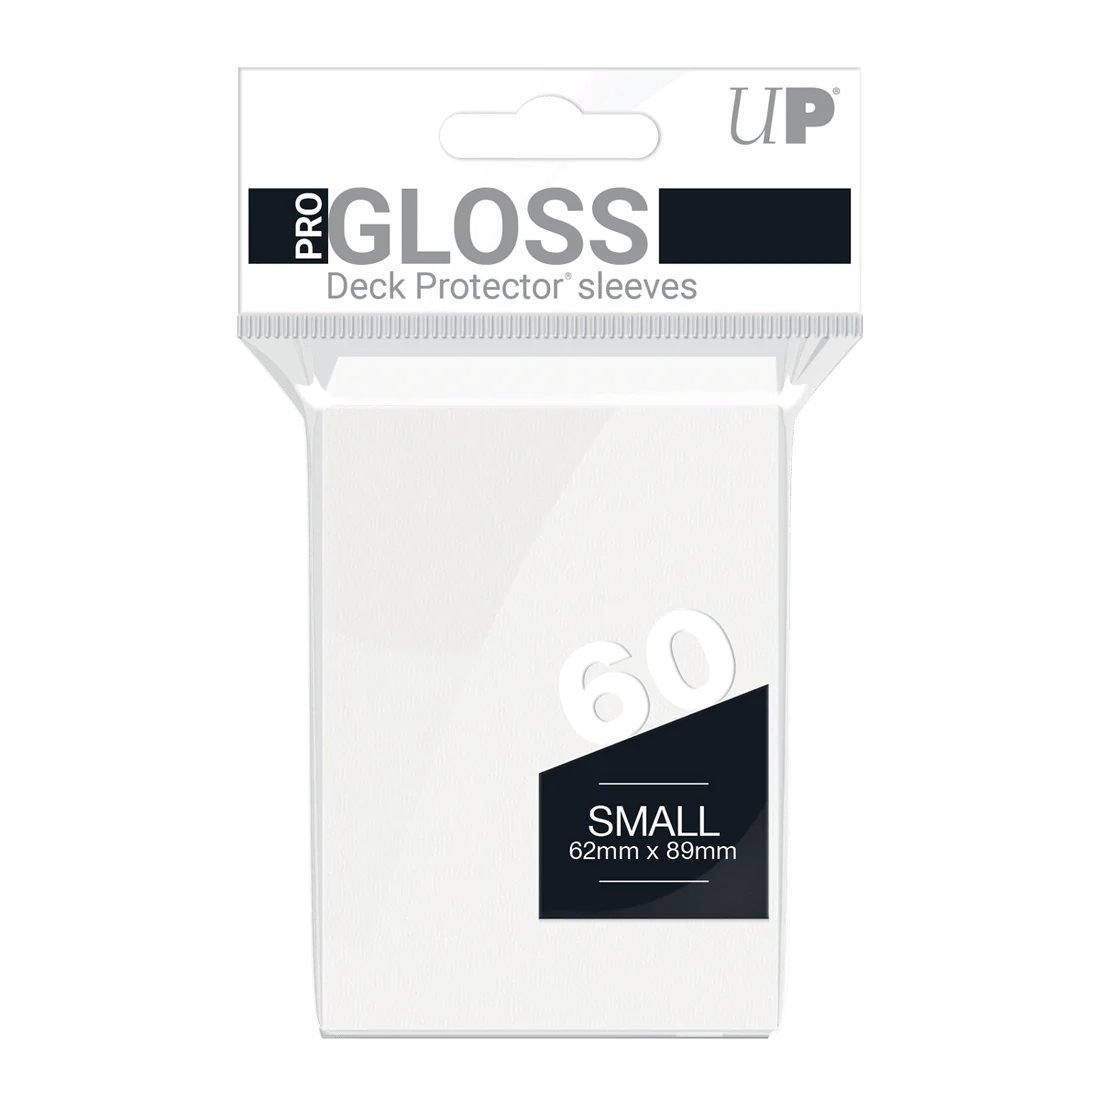 Ultra Pro PRO-Gloss 100ct Standard Deck Protector Sleeves -Clear